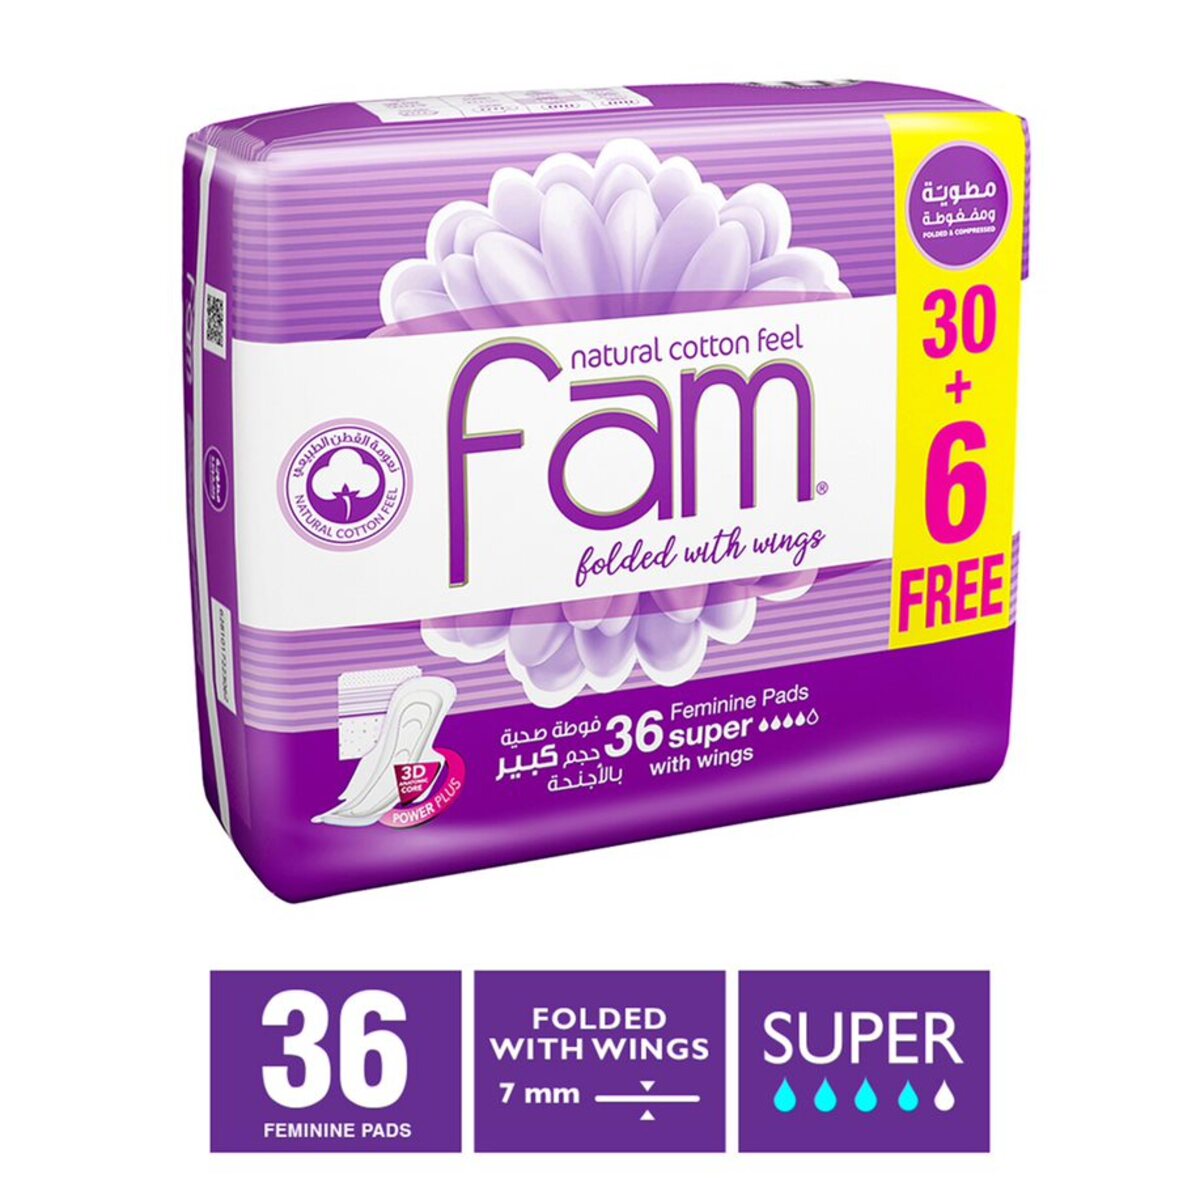 Fam Natural Cotton Feel Super Folded with Wings Feminine Pads 30+6